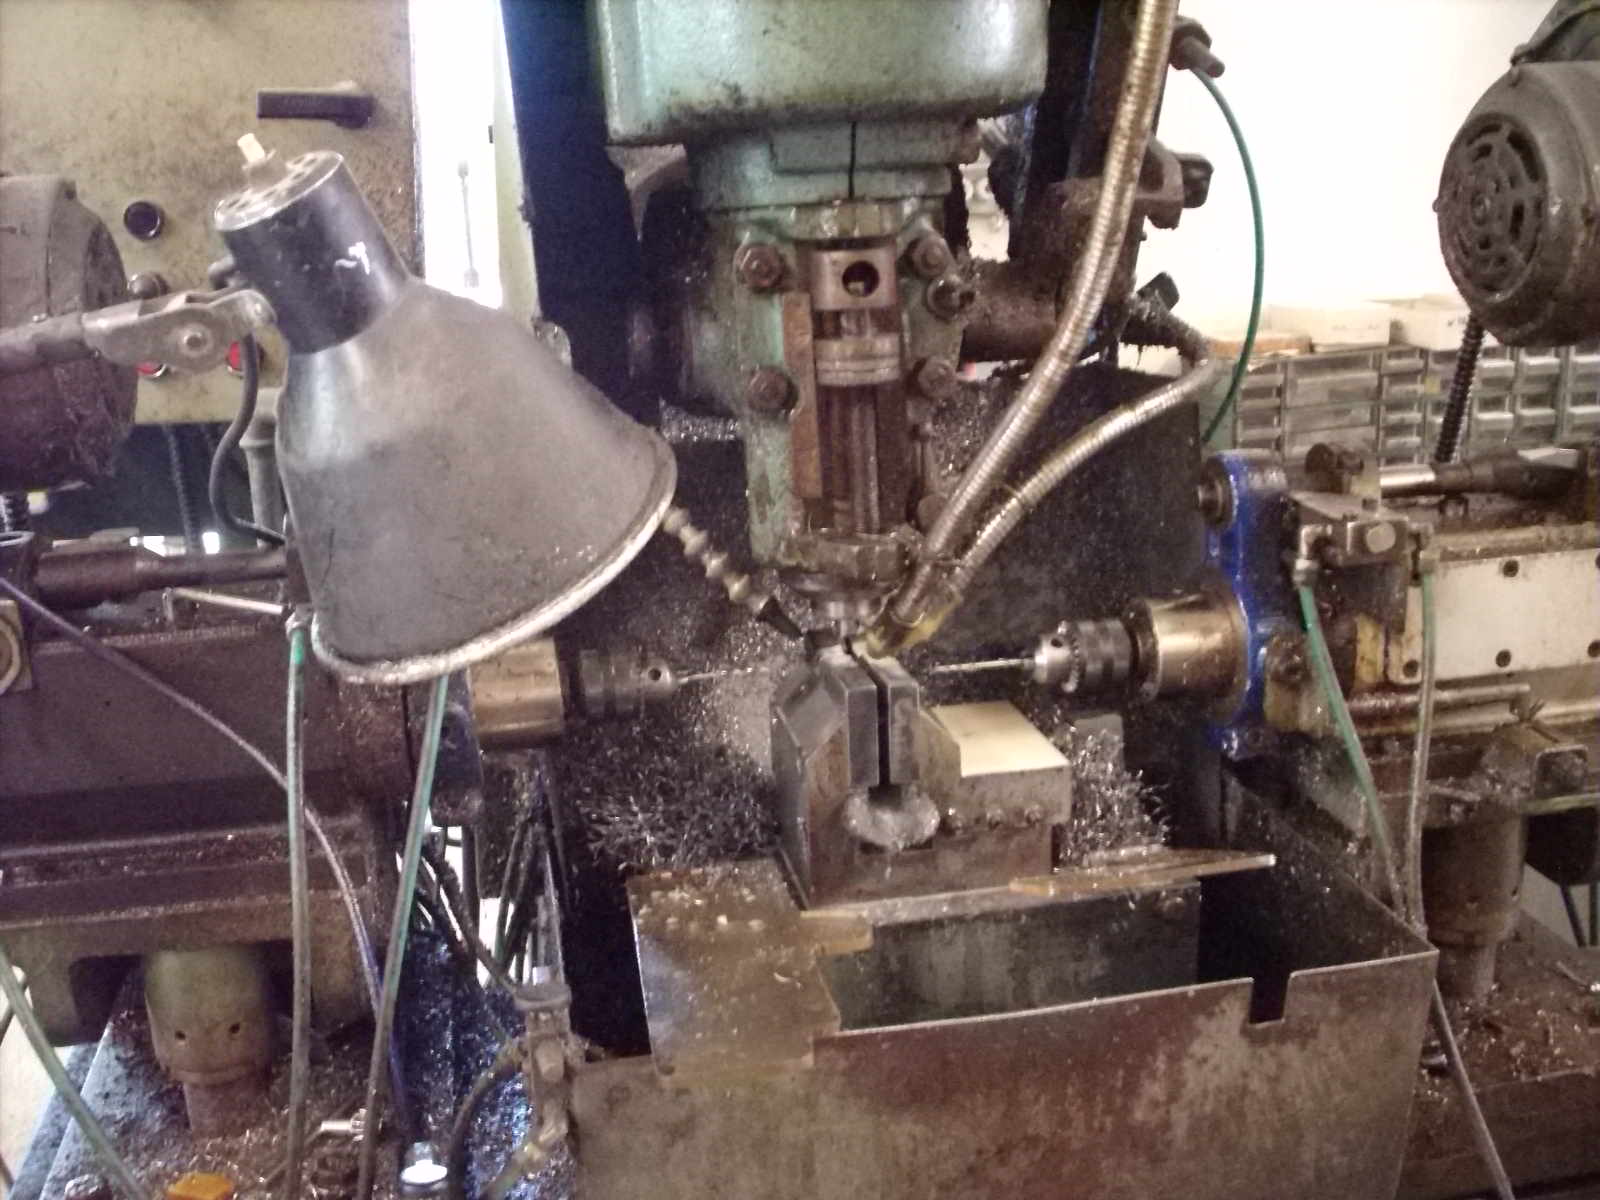 Not quite sure what all this machine did. Cut and drilled several places at once.